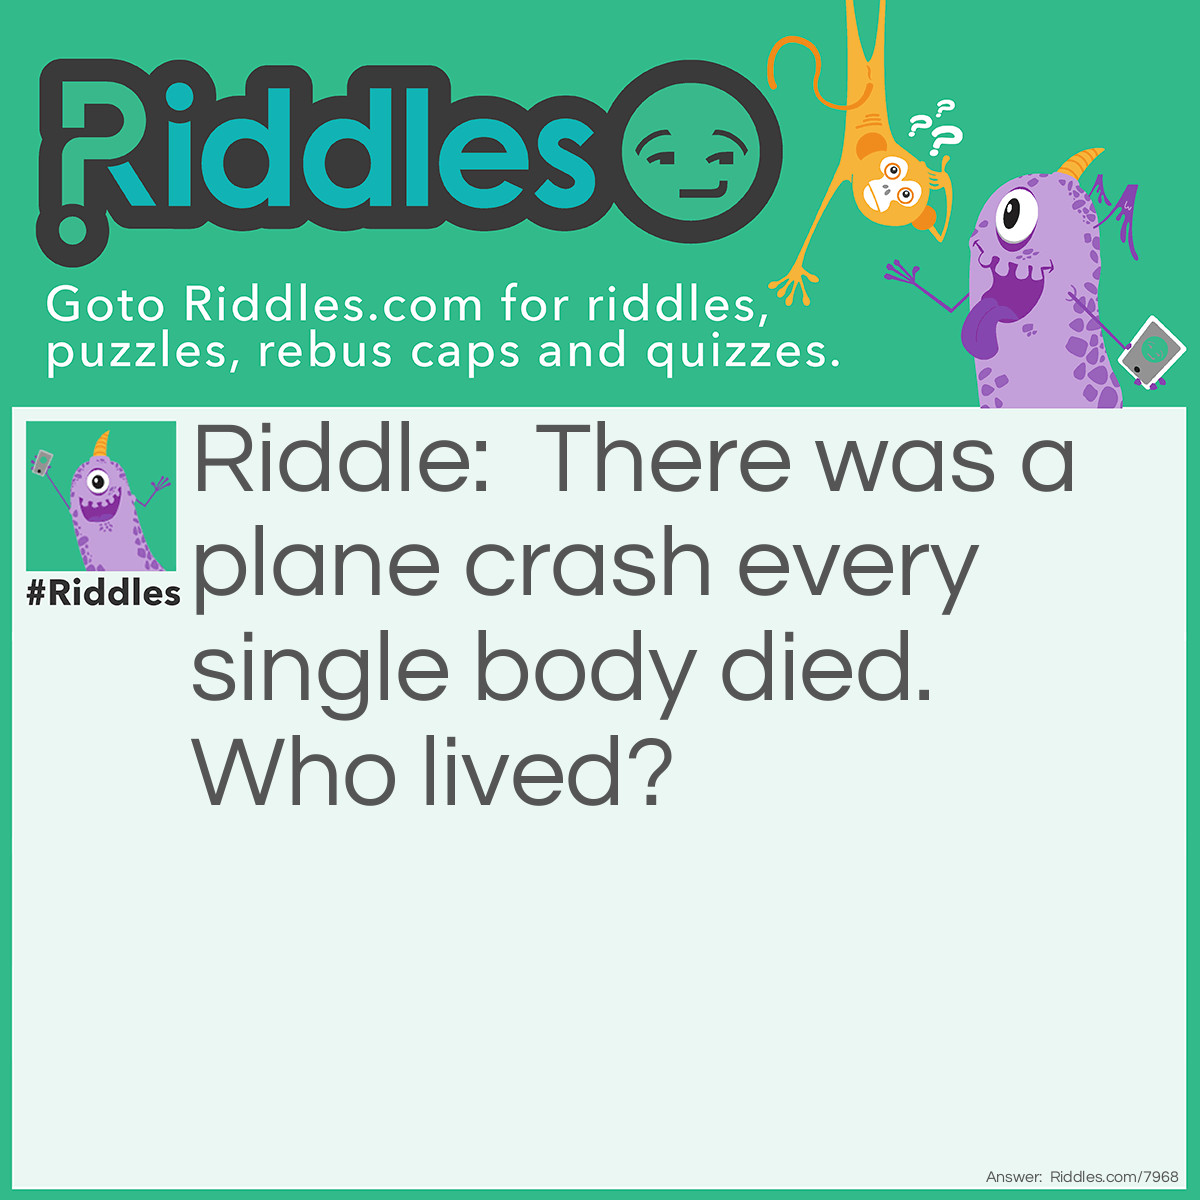 Riddle: There was a plane crash every single body died. Who lived? Answer: The couples.